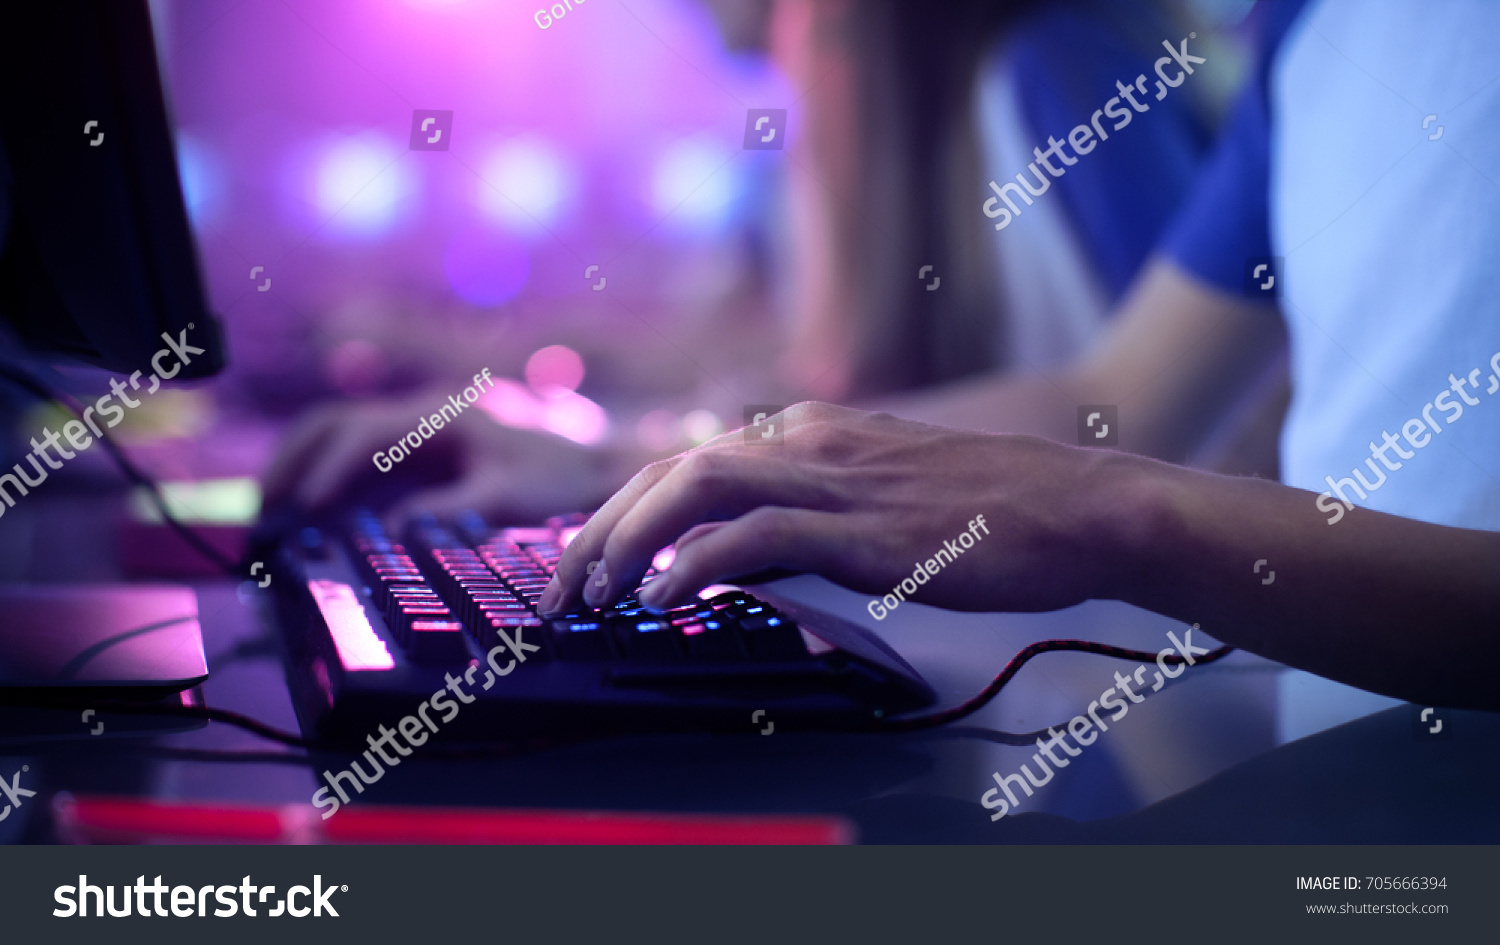 Close-up On Gamer's Hands on a keyboard, Actively Pushing Buttons, Playing MMO Games Online. Background is Lit with Neon Lights. #705666394